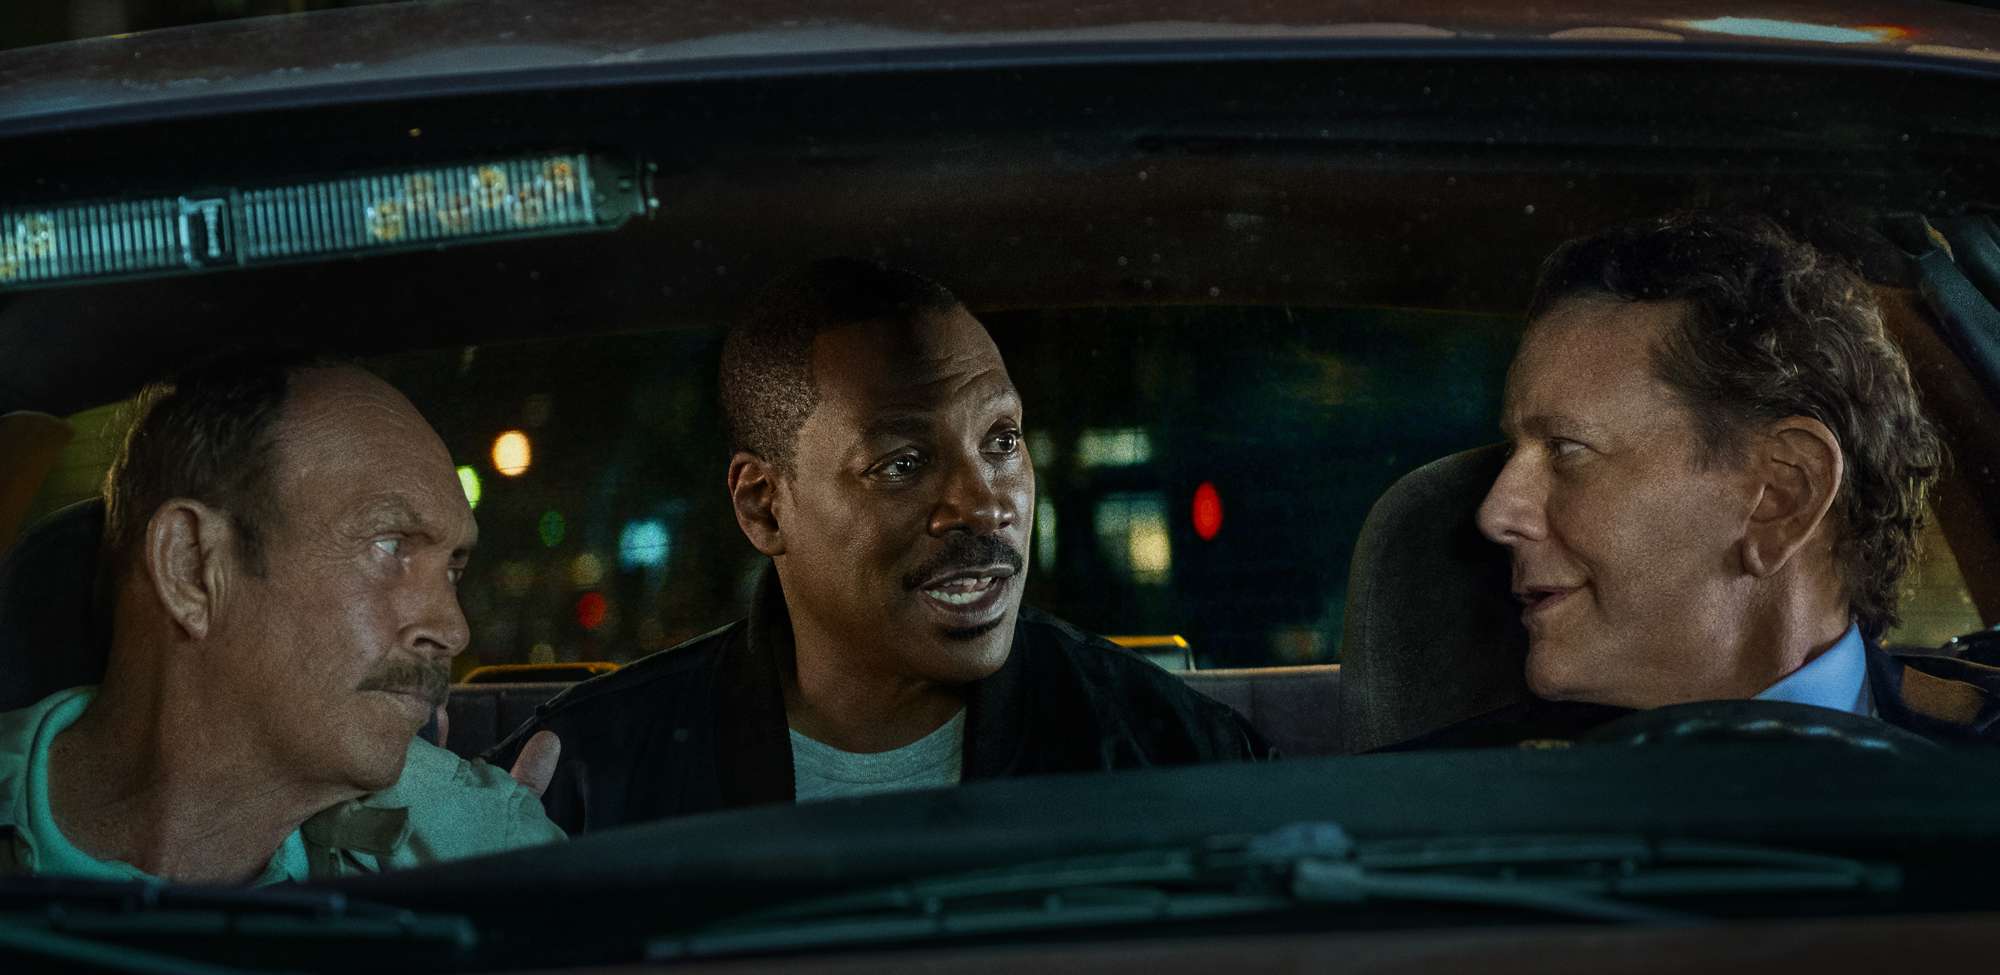 eddie murphy improvised the 'funniest moments' in new “beverly hills cop”, says director